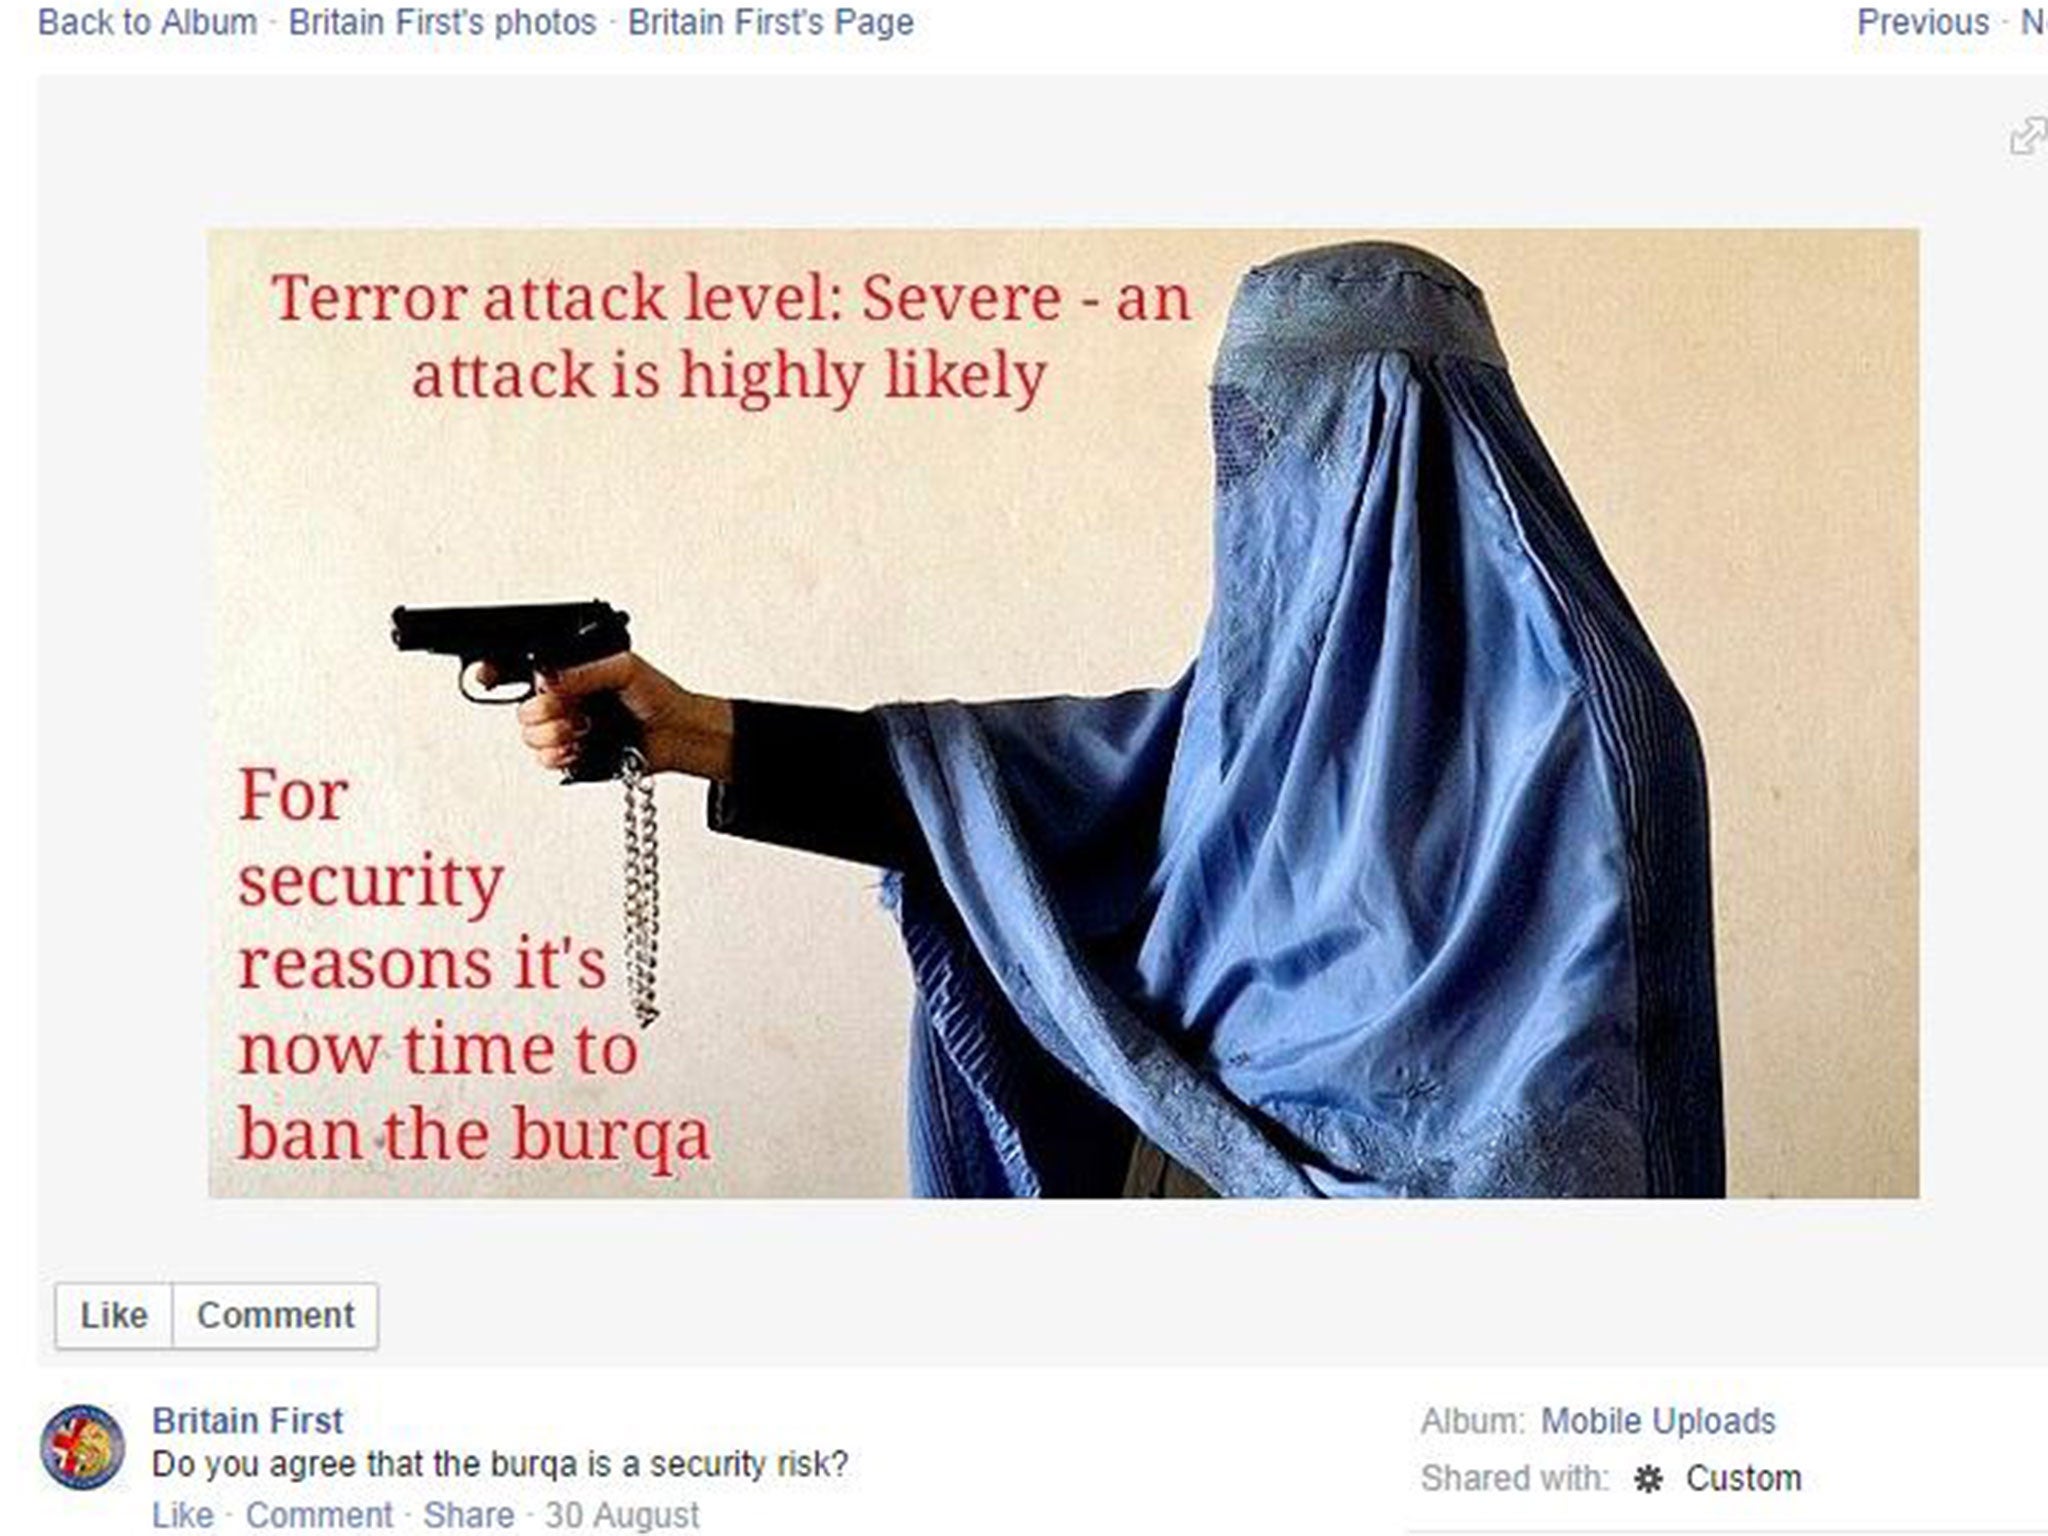 Screenshot shows the image of Lieutenant Colonel Malalai Kakar which was posted on Facebook by Britain First